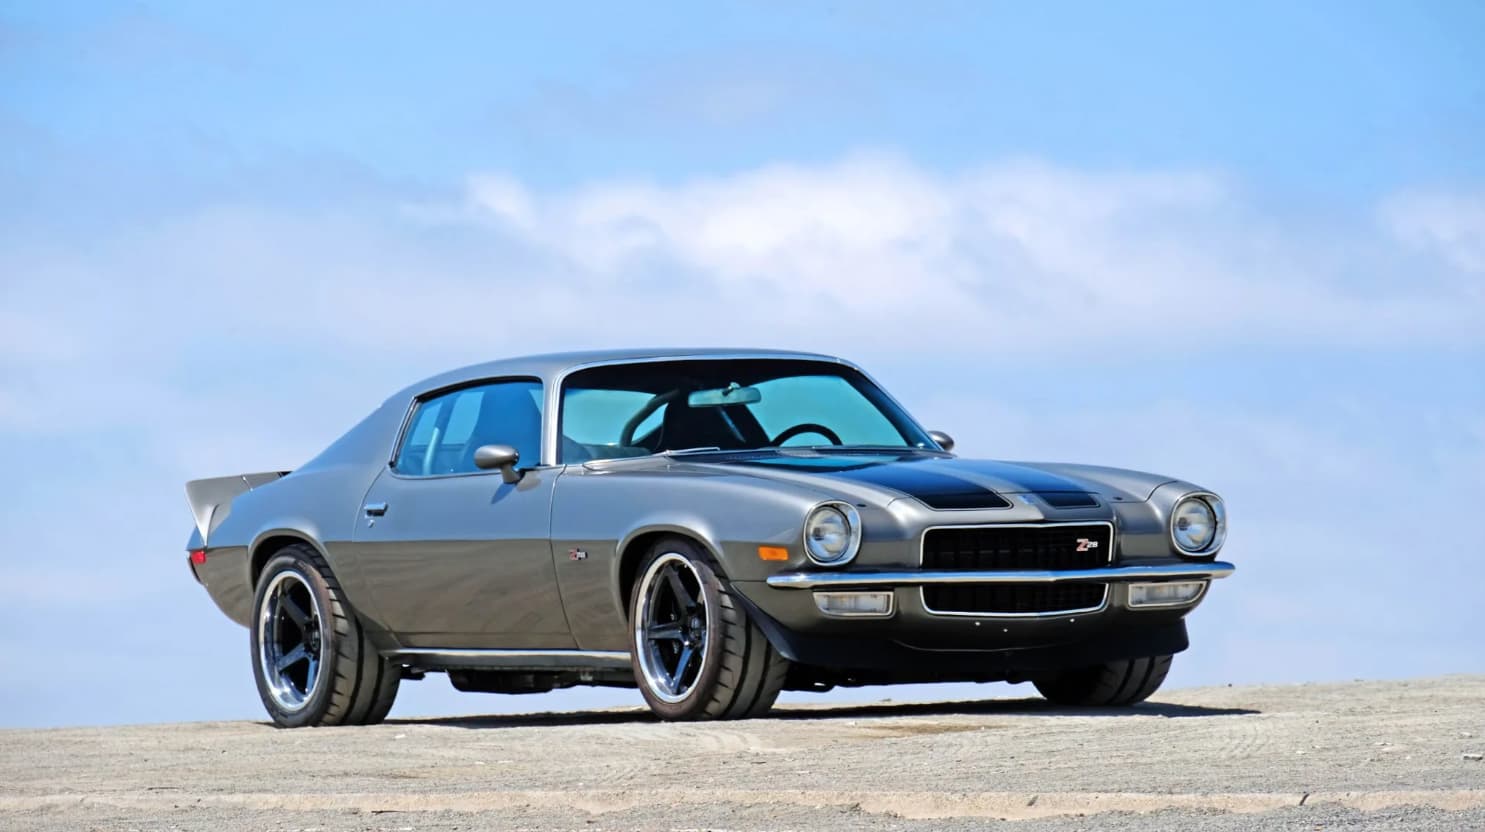 Step into the Fast Lane with the Street Dreams Modified 1970 Chevrolet Camaro